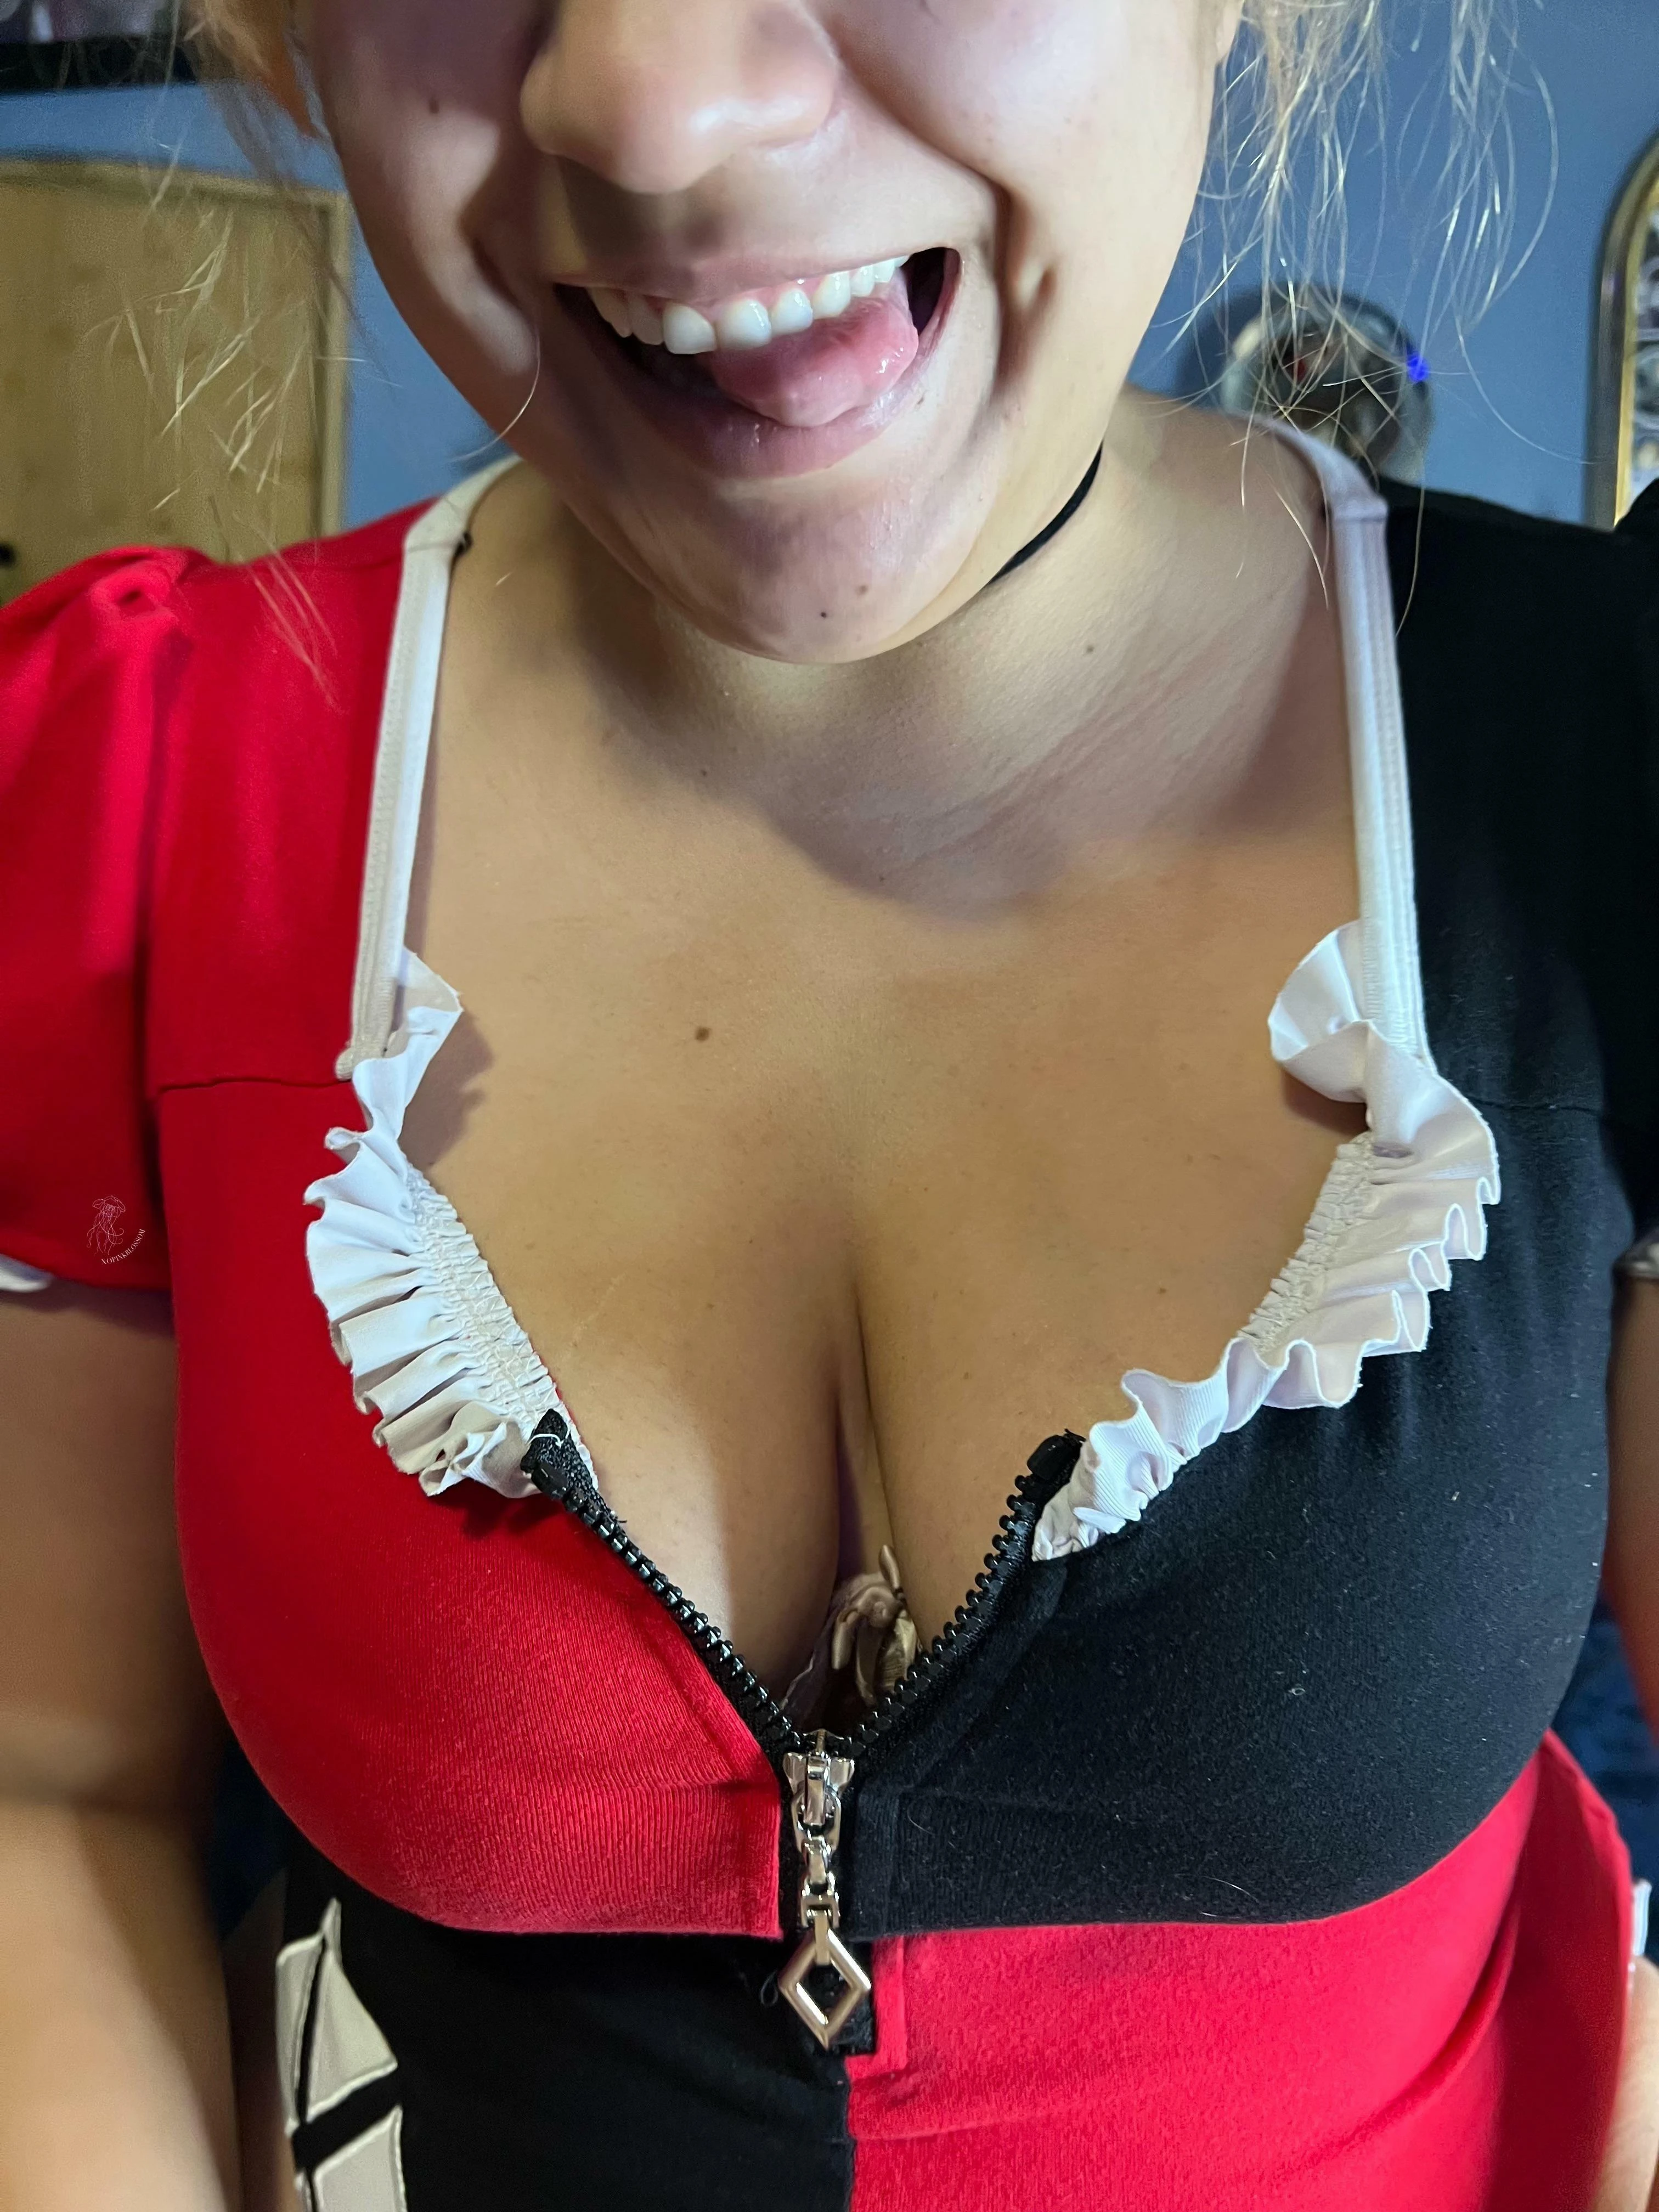 Goofy smile and bodysuit cleavage